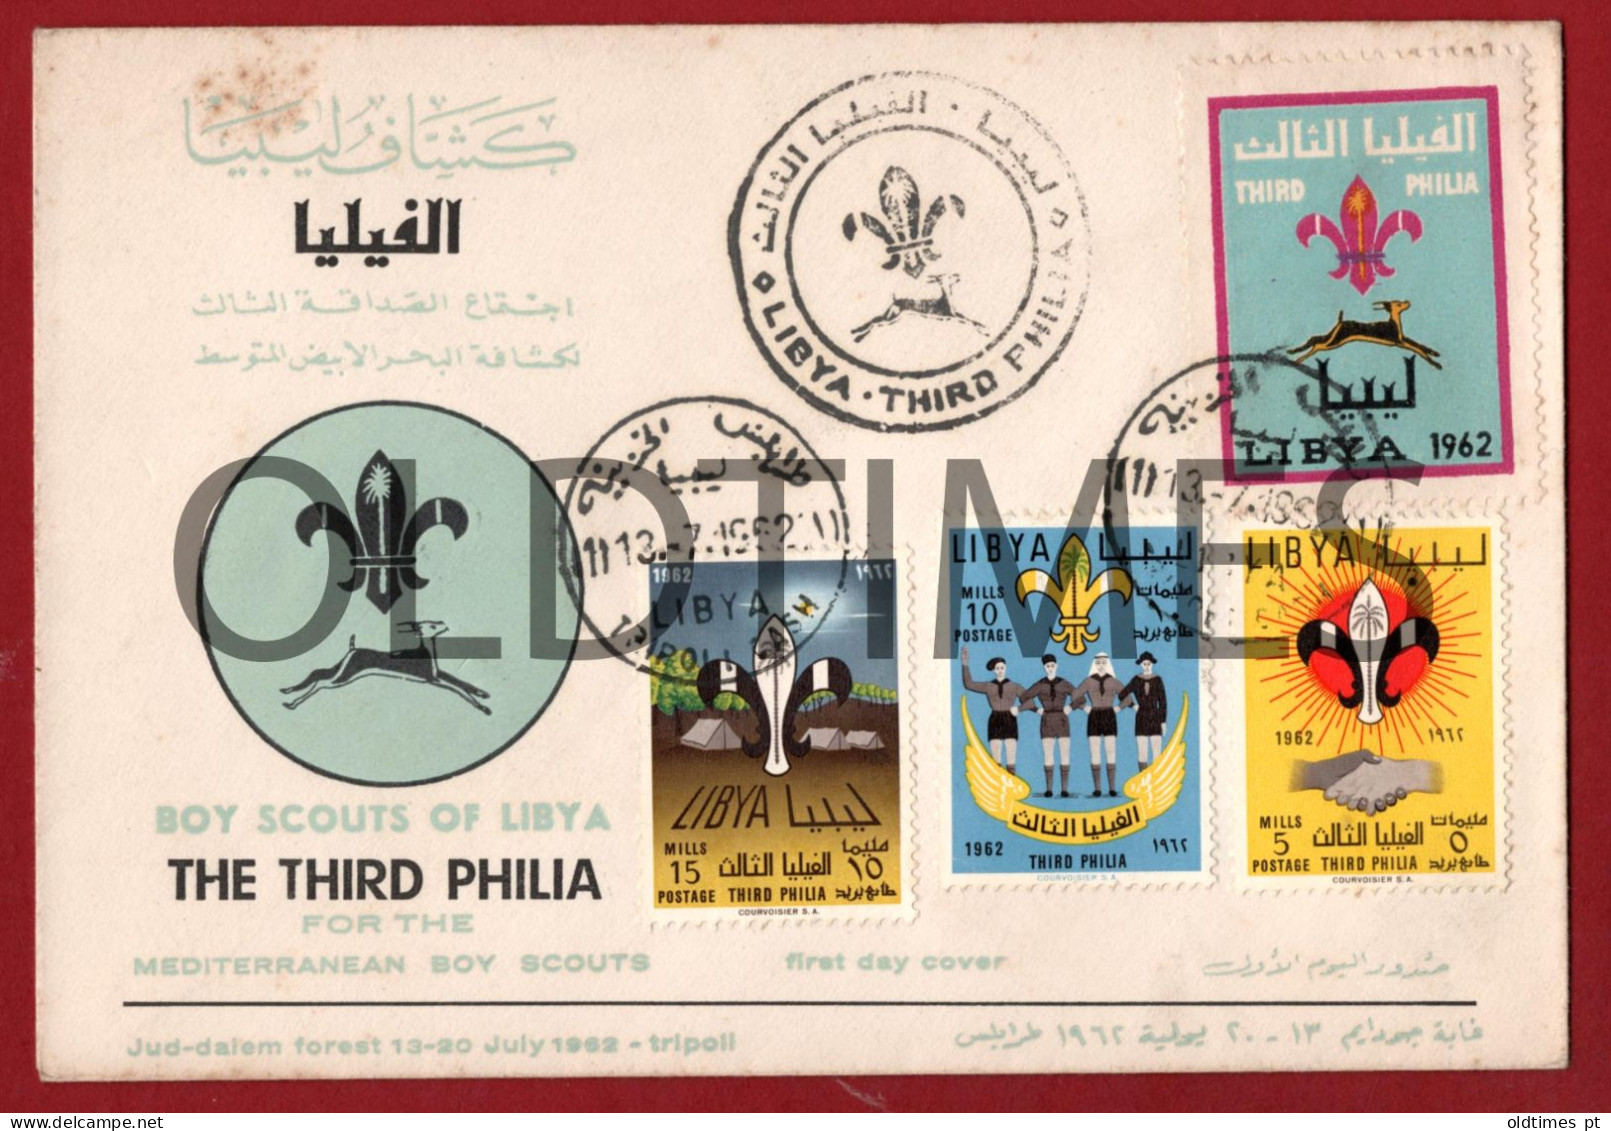 LIBYA - BOY SCOUTS OF LIBYA - THE THIRD PHILIA FOR THE MEDITERRANEAN - FIRST DAY COVER - 1962 ENVELOPE - Scoutisme